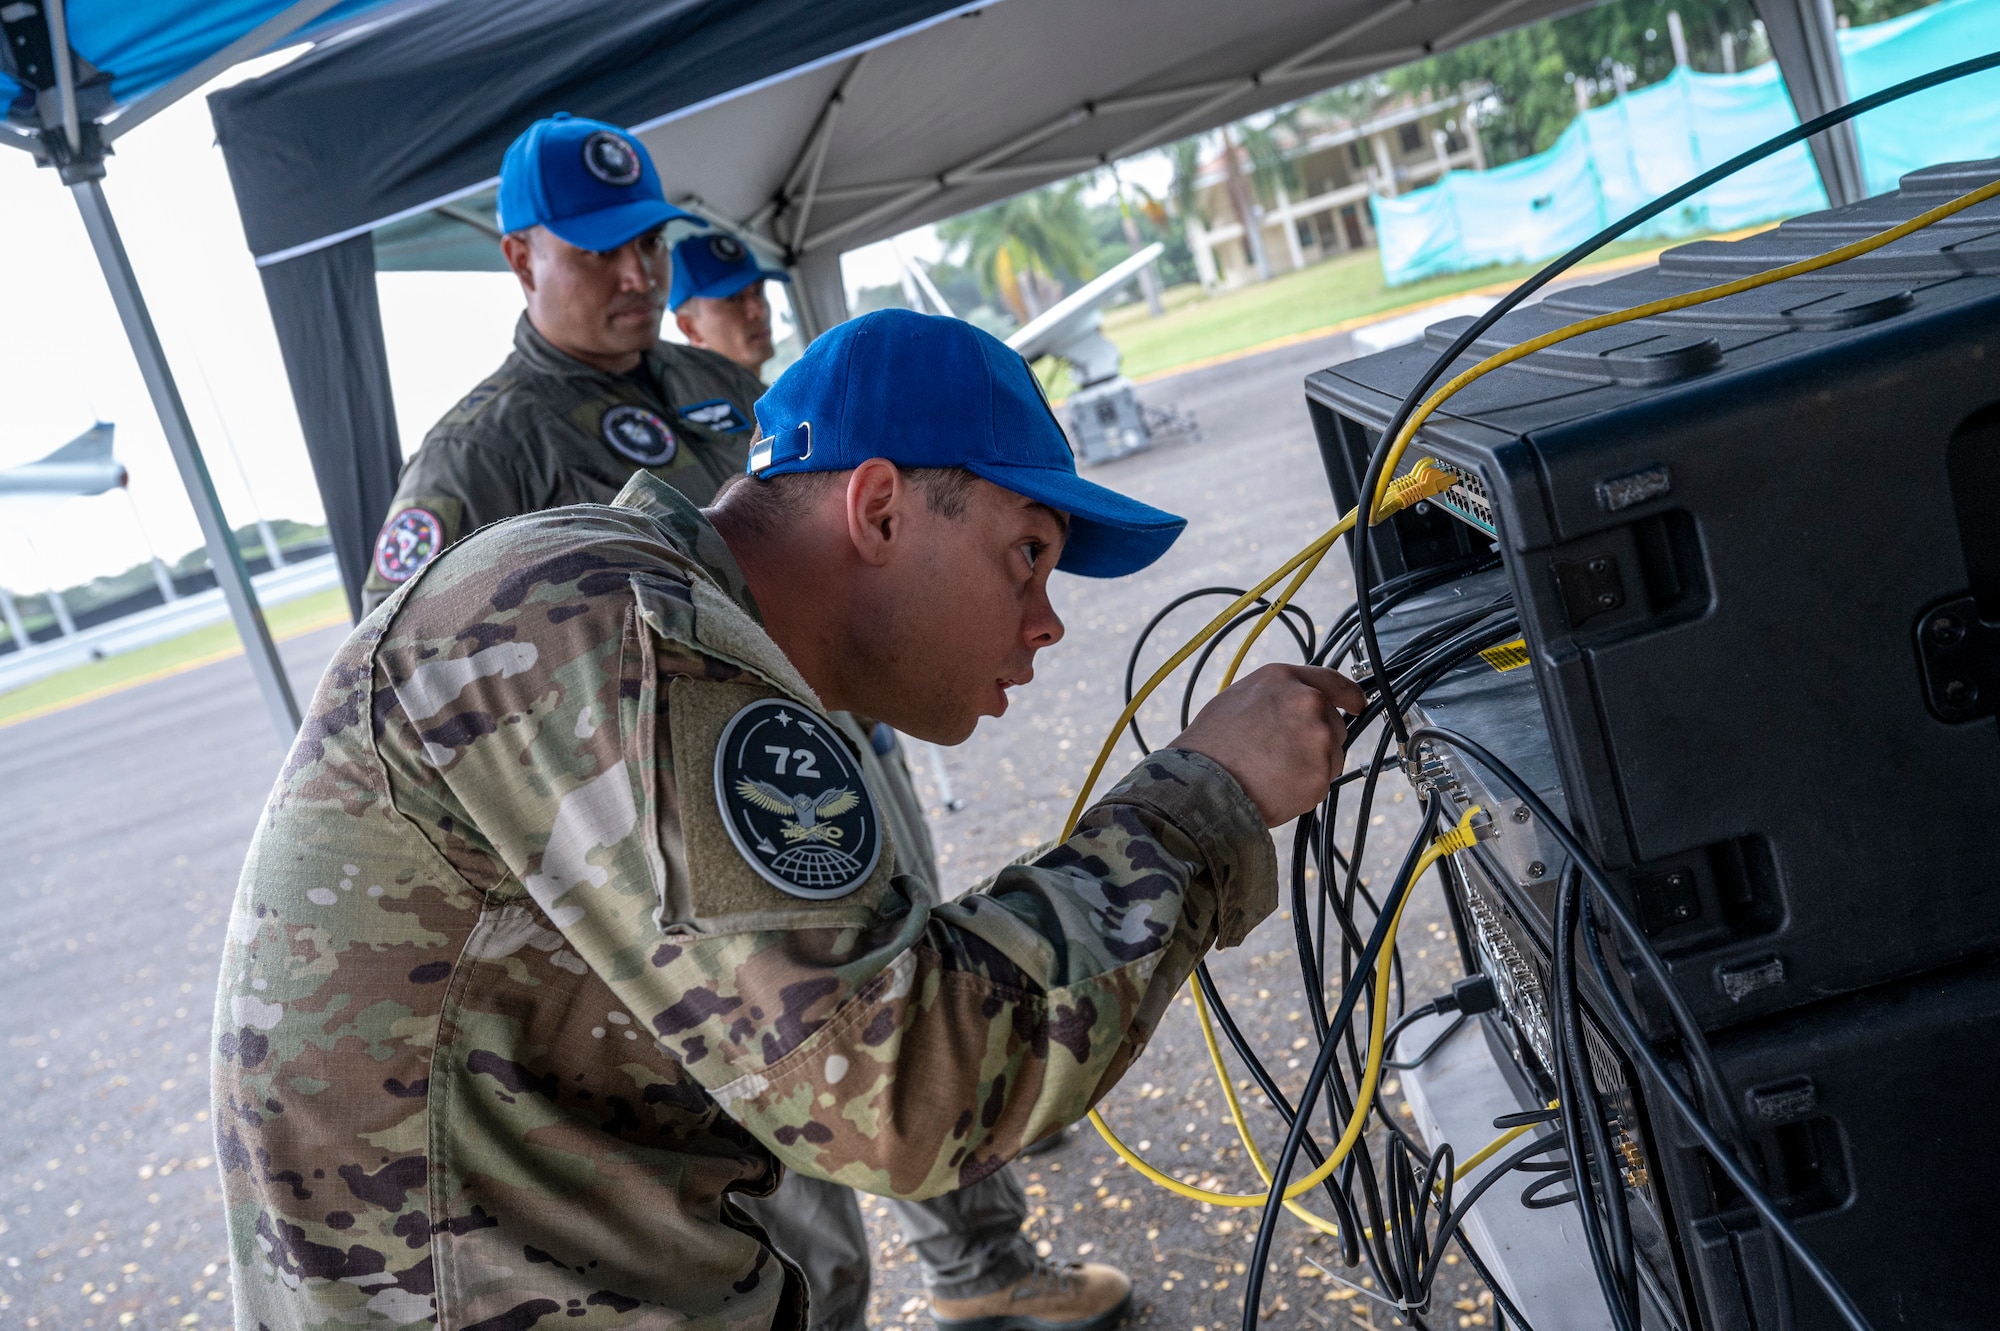 A U. S. Space Force Guardian trains with a Colombian Air Force member on the Multi-band Assessment of the Communication Environment (MACE) system as part of Operation Thundergun Express, a 21-day space deployment exercise nested under Resolute Sentinel 23. MACE is a rapidly-deployable, cost-effective, user friendly spectrum analysis and monitoring tool that was key in demonstrating space Agile Combat Employment capabilities during the exercise.  (U. S. Air Force Photo by Staff Sgt. Matthew Matlock)